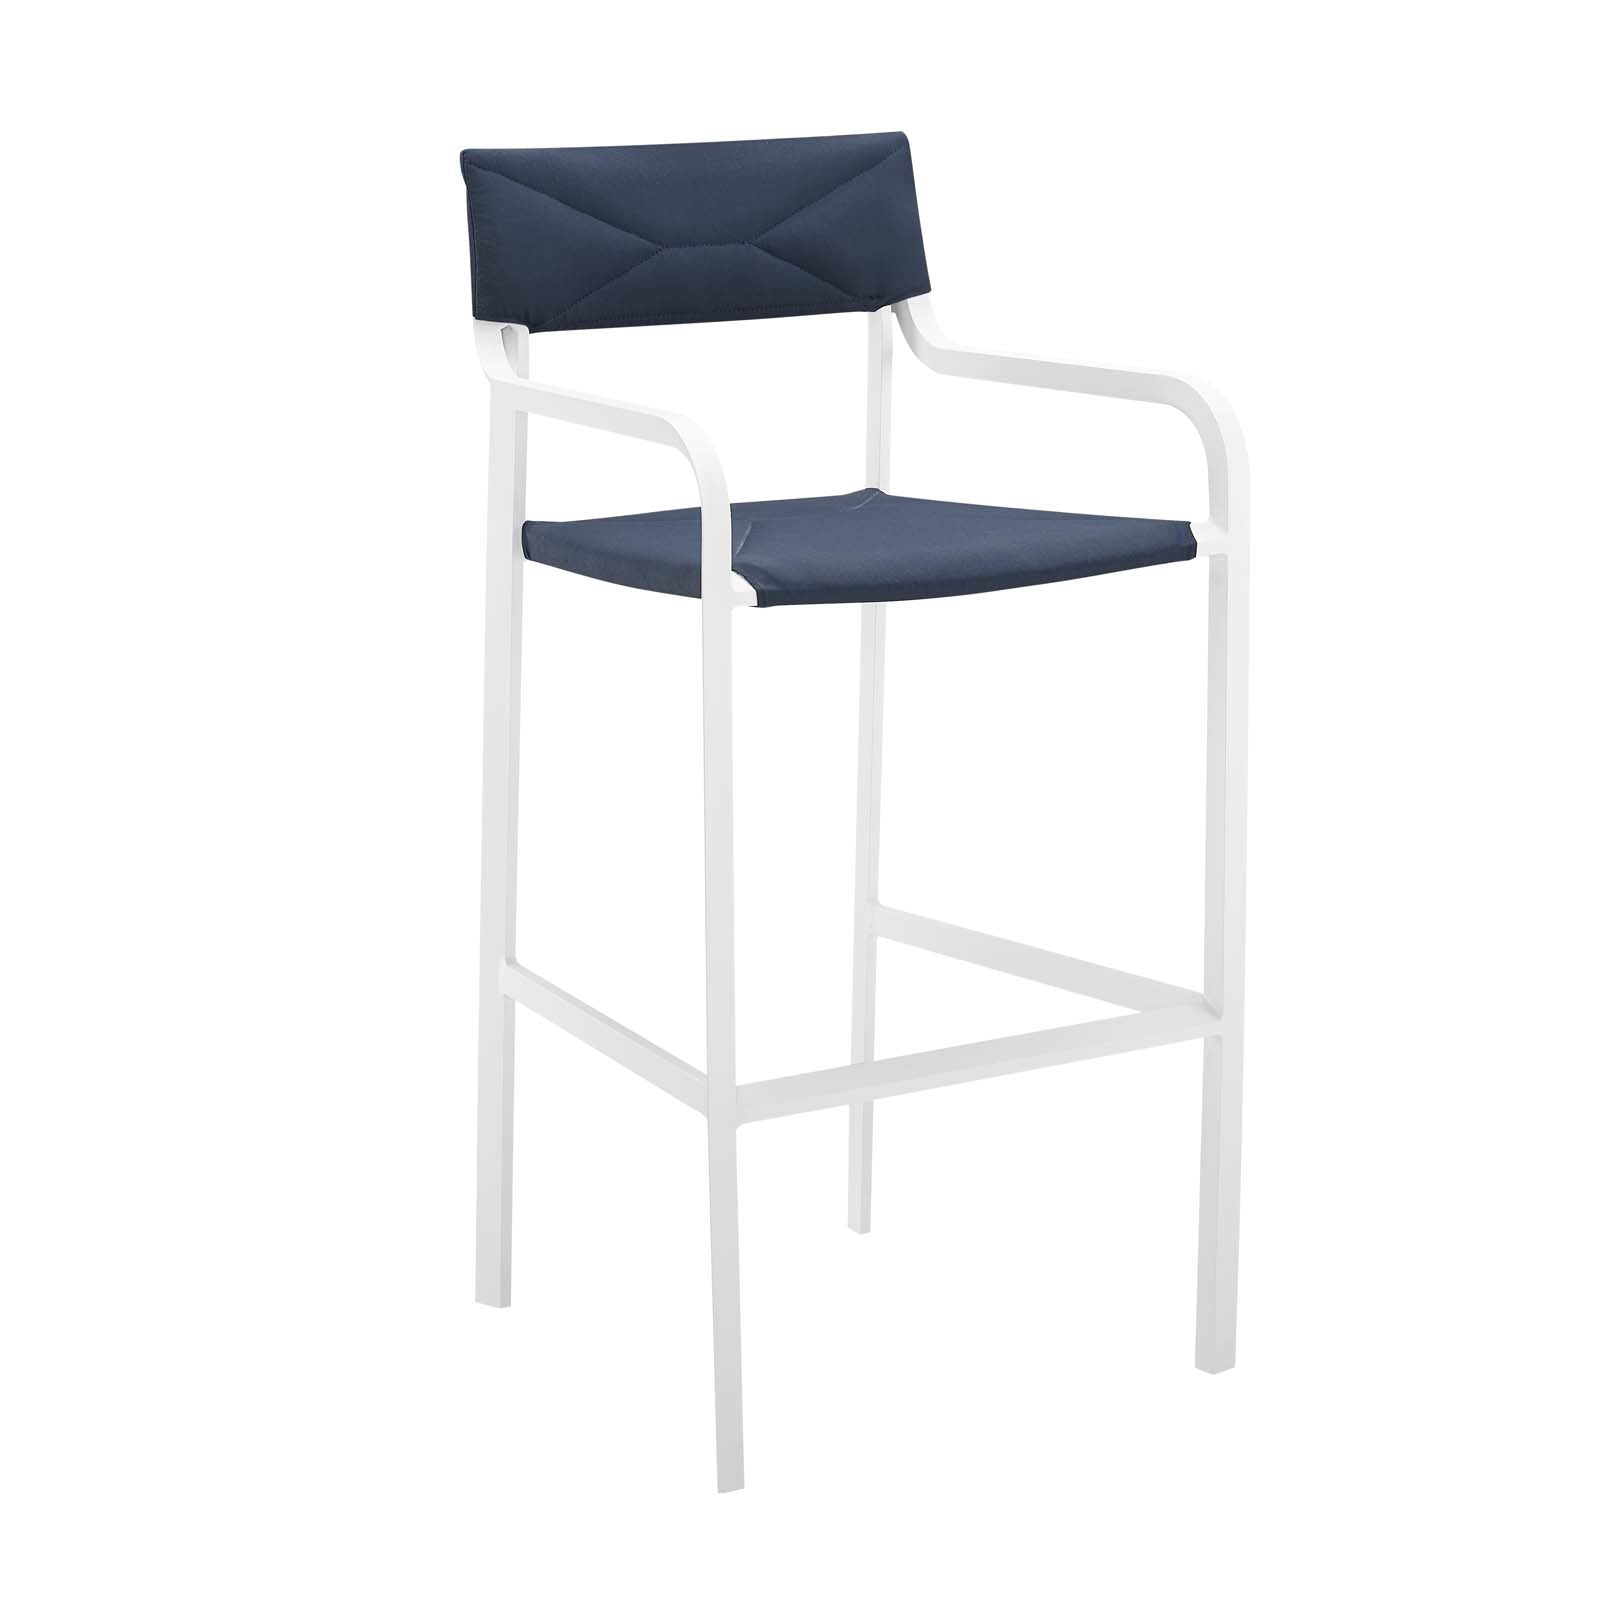 Raleigh Stackable Outdoor Patio Aluminum Bar Stool - East Shore Modern Home Furnishings